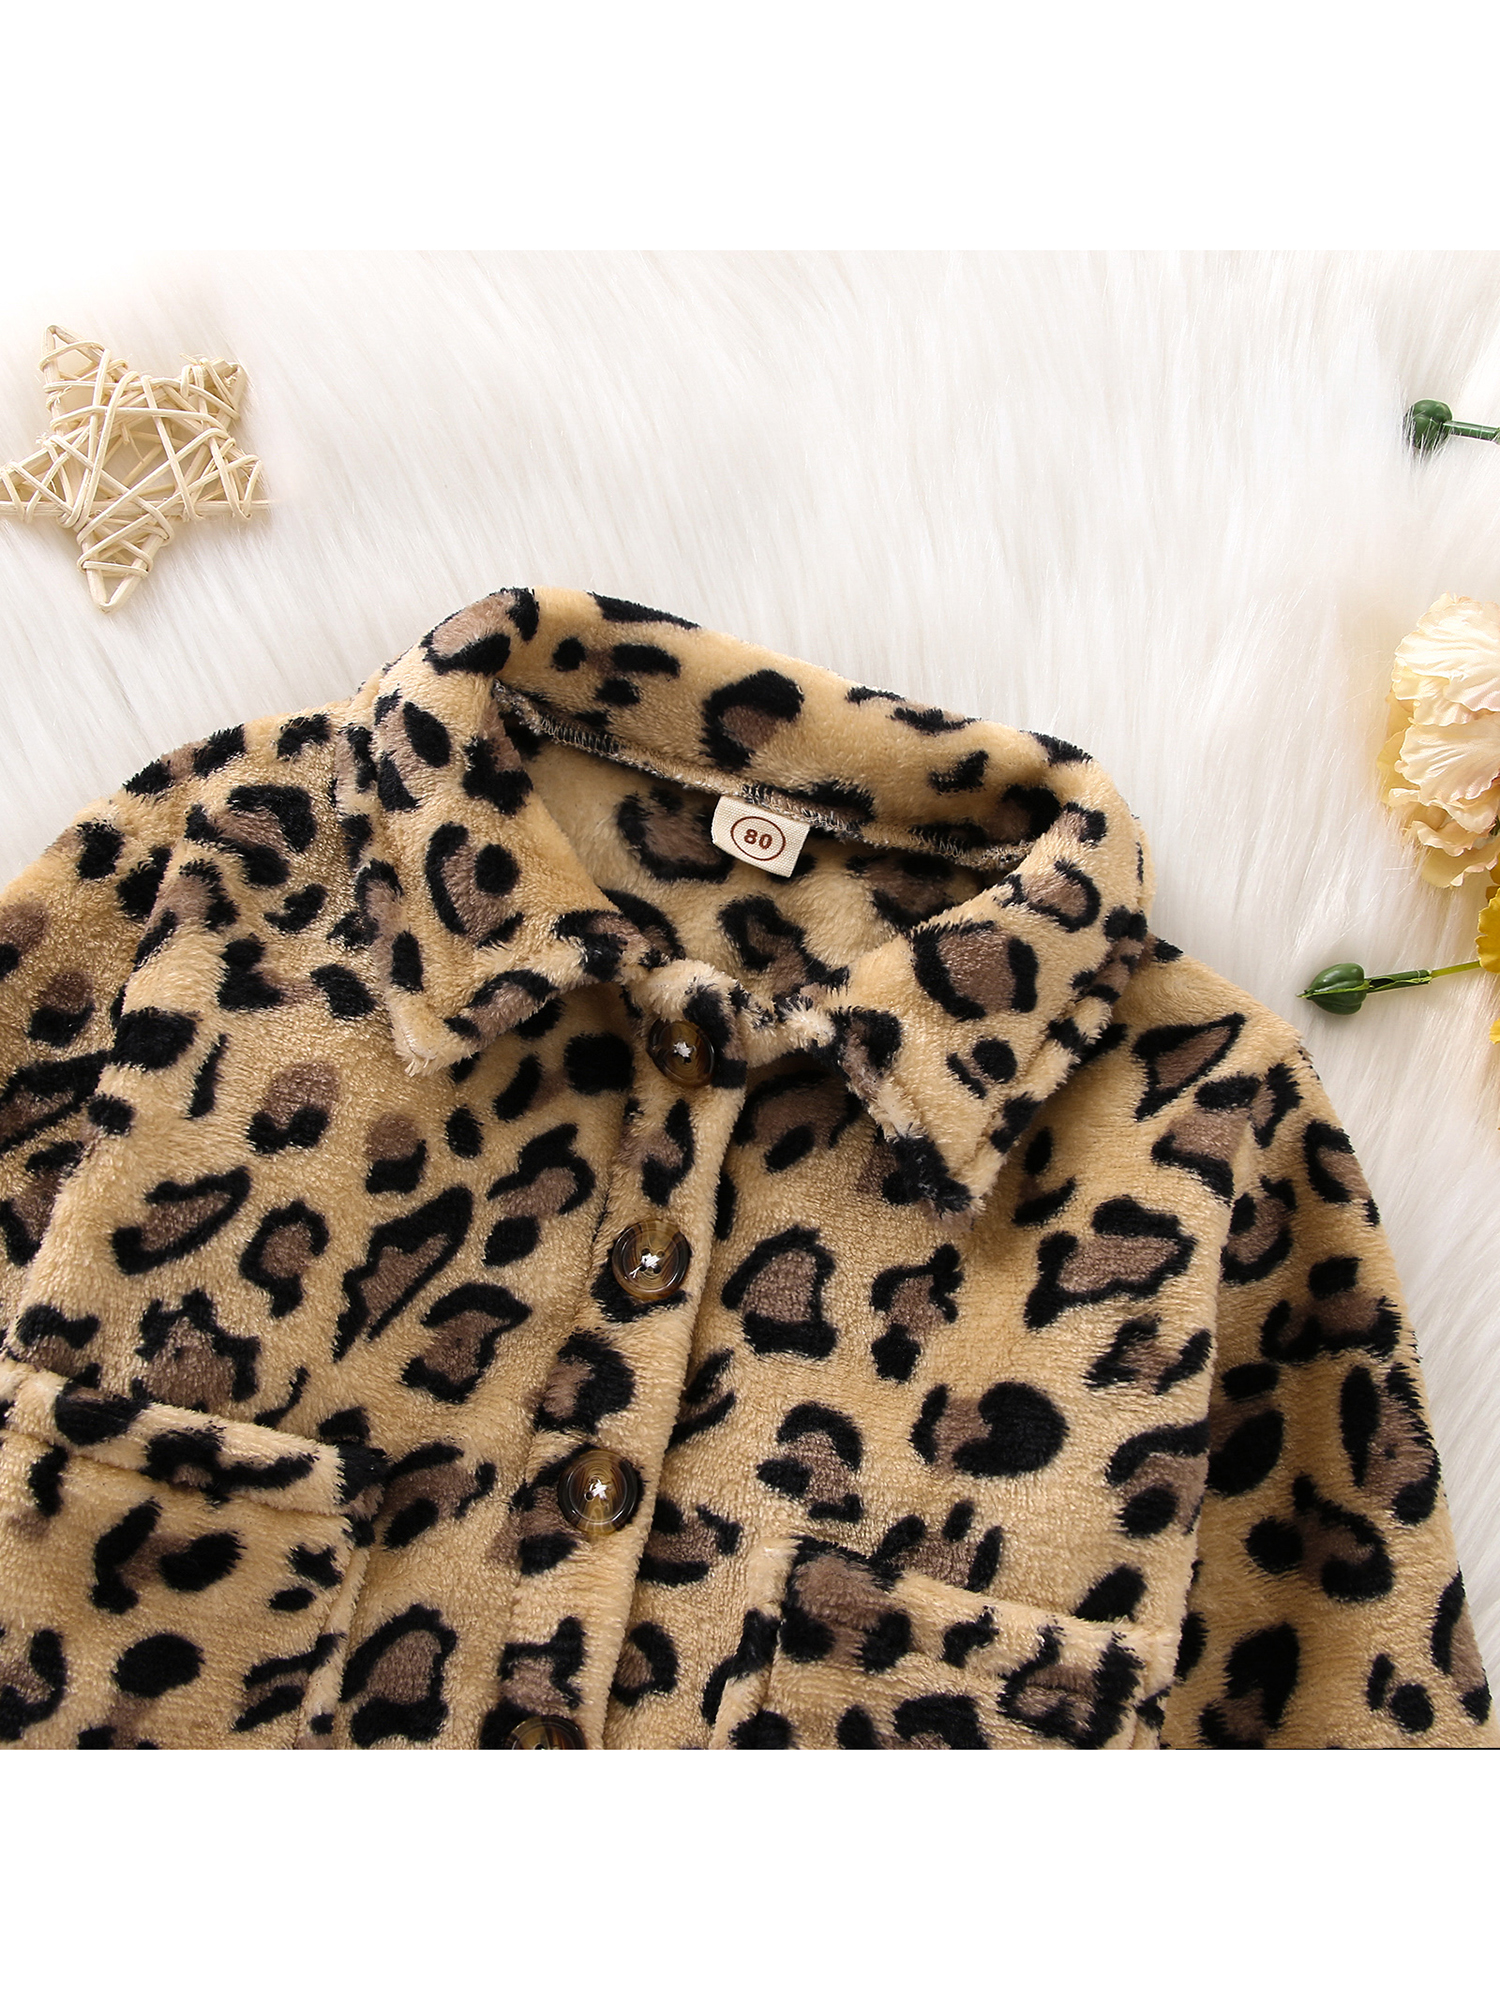 Musuos Toddler Baby Winter Jacket, Fashion Long Sleeve Leopard Print Button Down Plush Coat - image 5 of 10